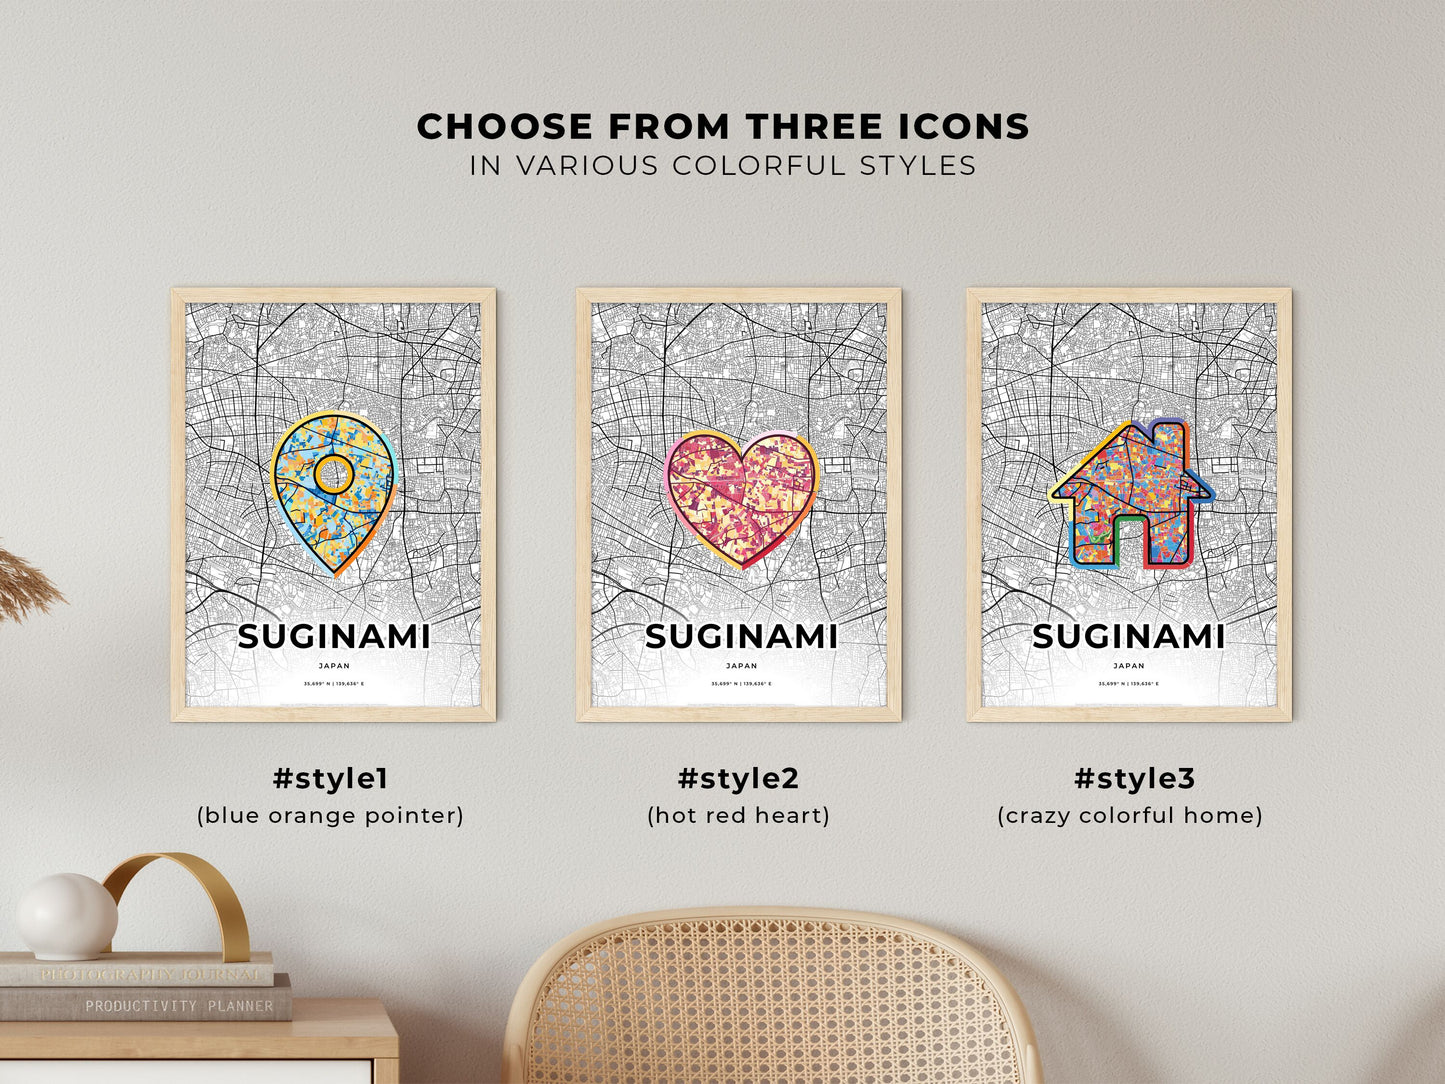 SUGINAMI JAPAN minimal art map with a colorful icon. Where it all began, Couple map gift.